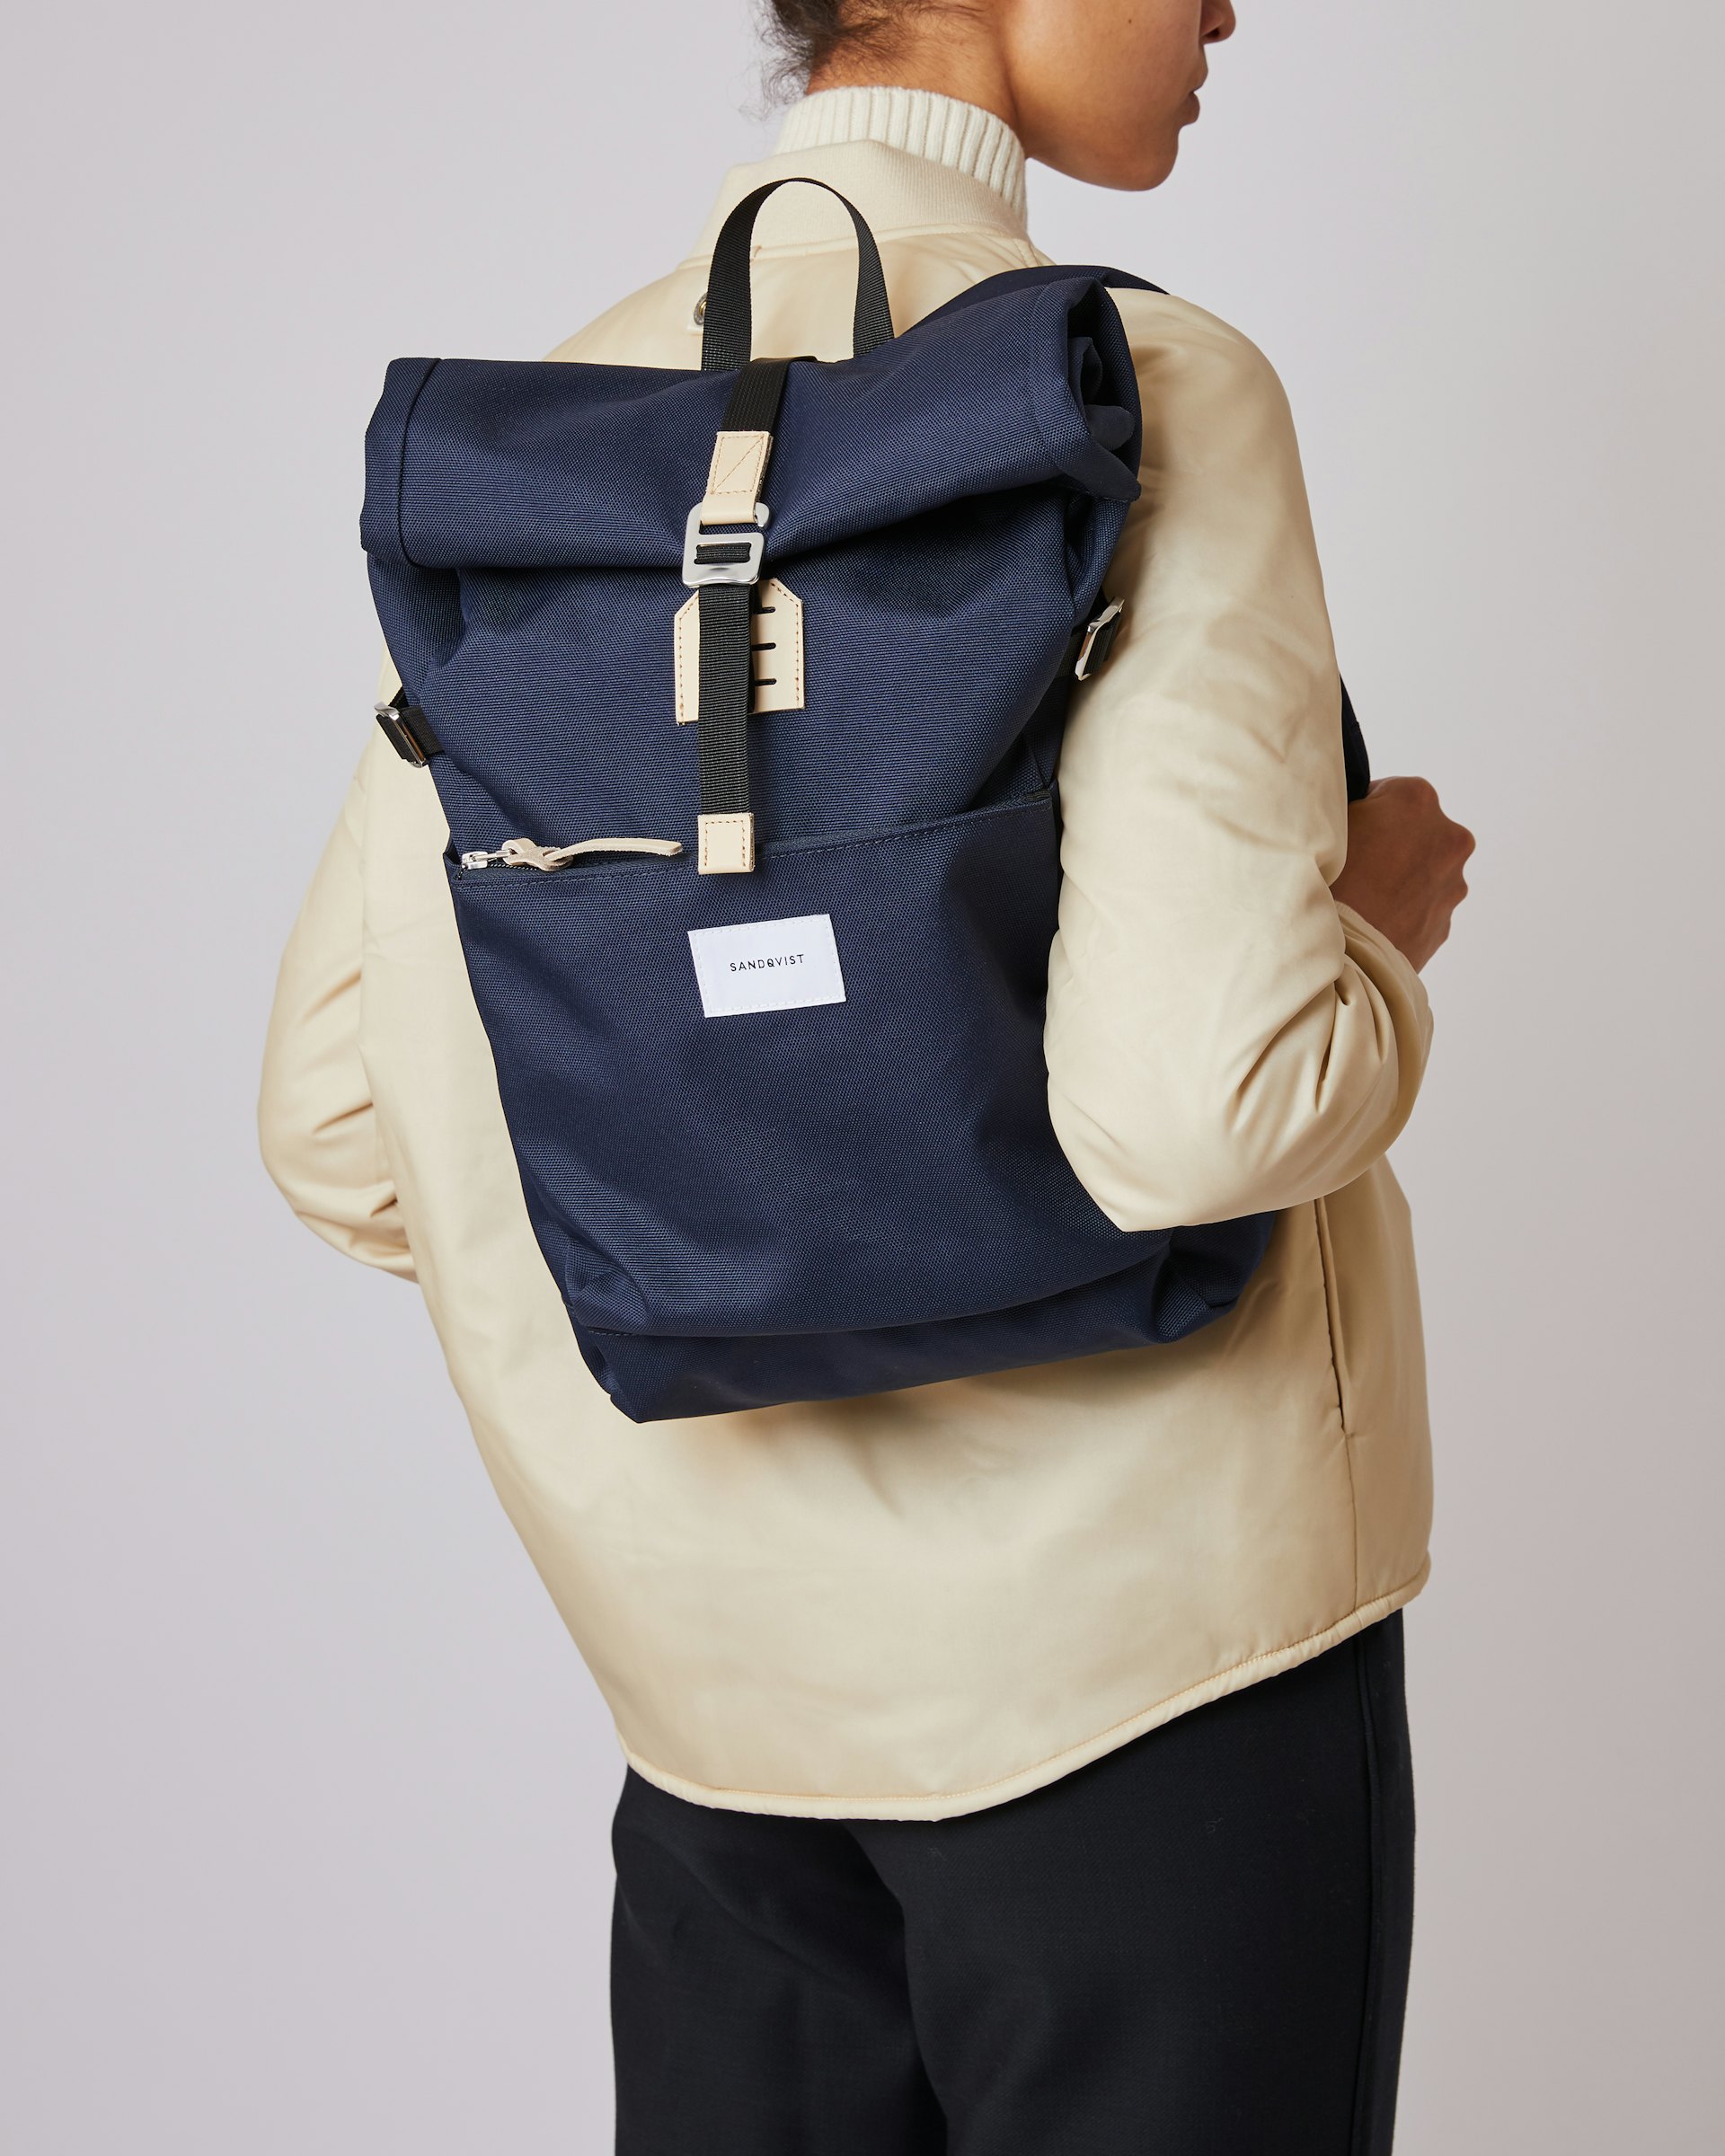 Ilon belongs to the category Backpacks and is in color navy (3 of 7)